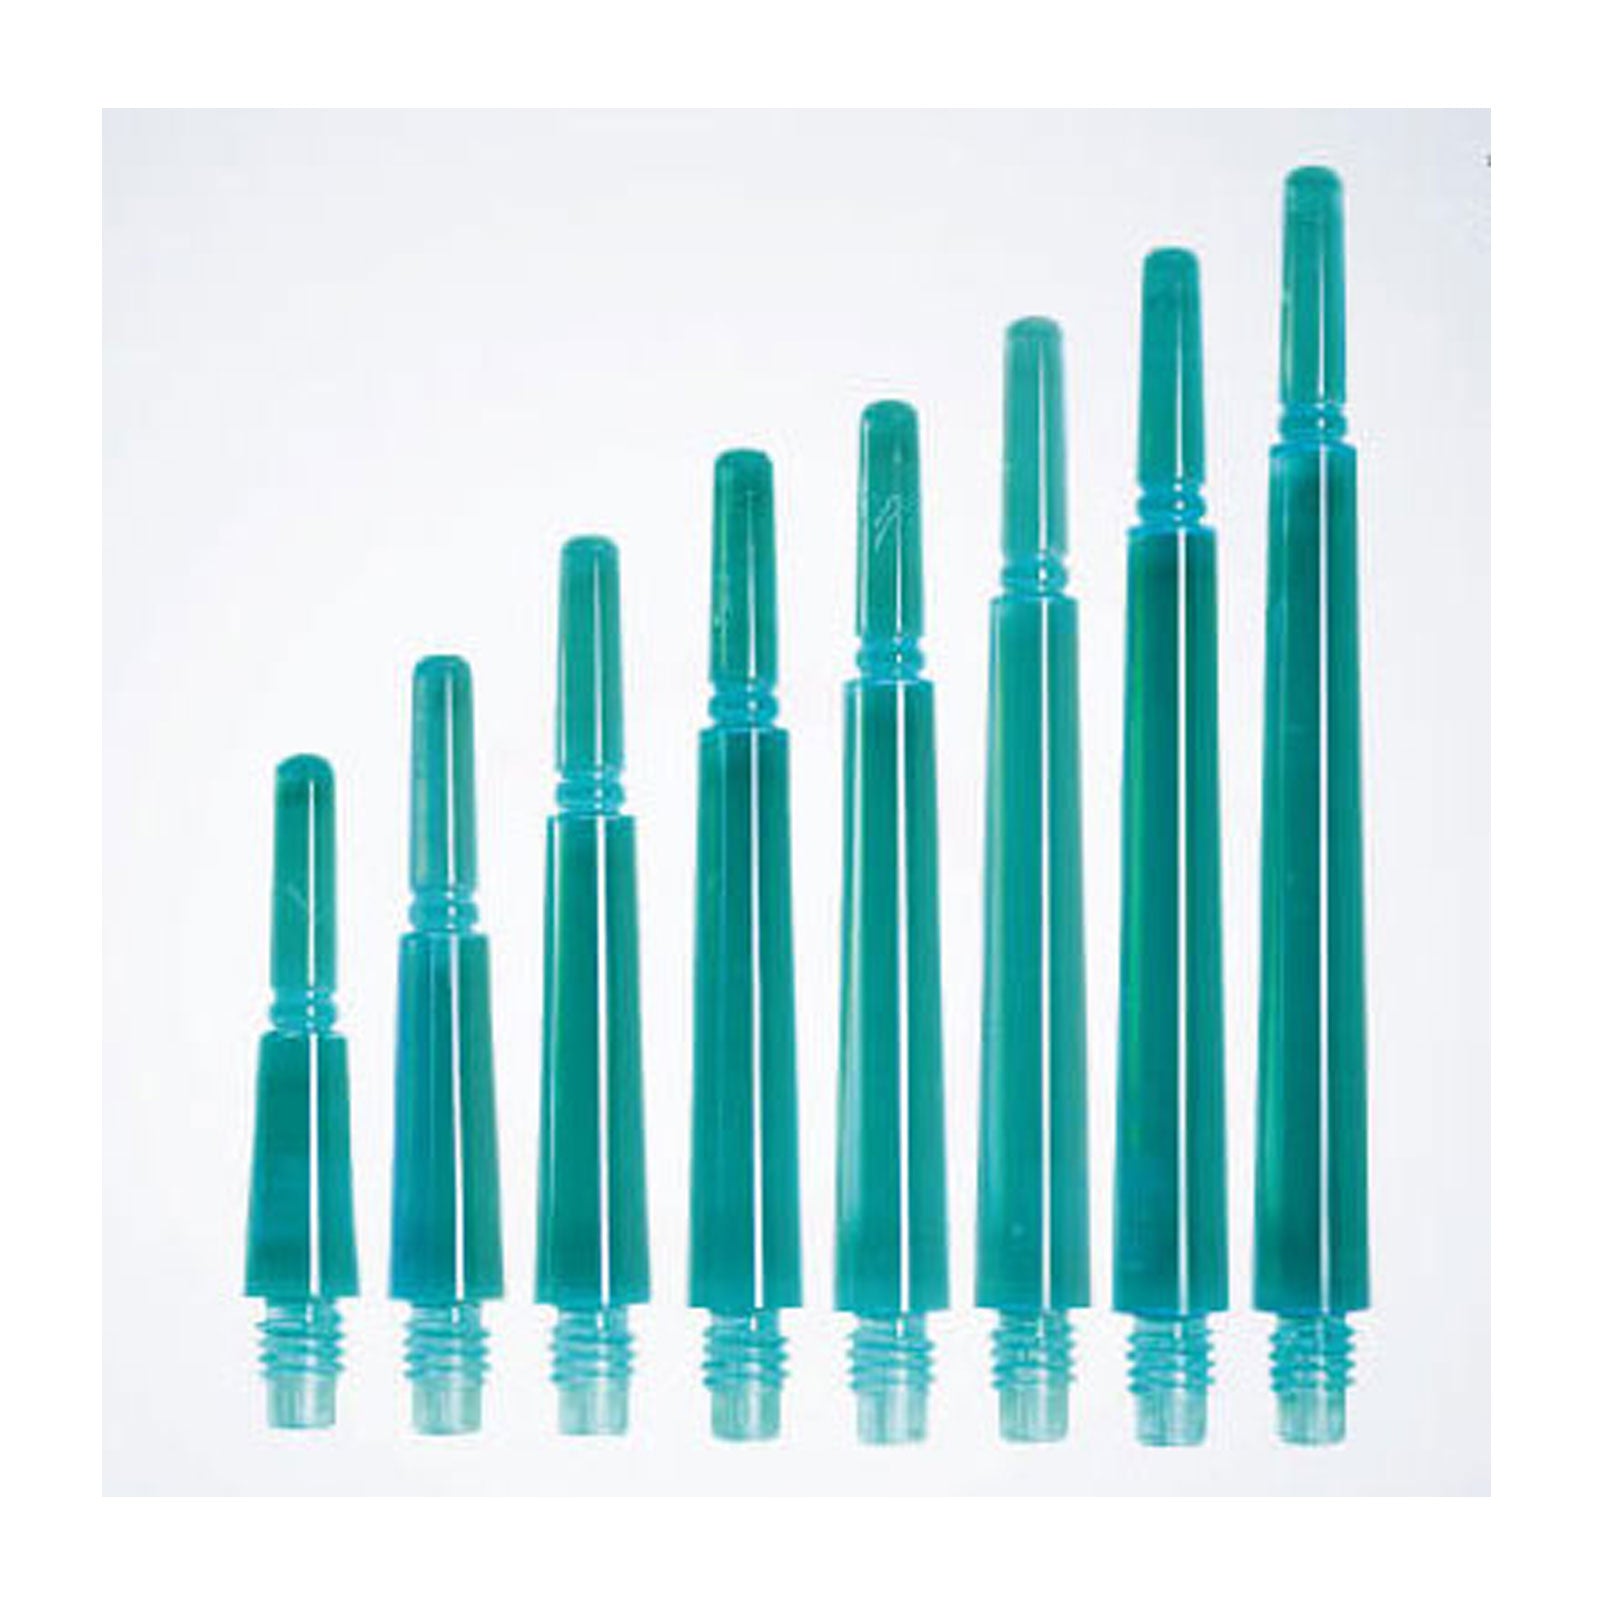 Cosmo Stems - Normal Locked Clear Blue Shafts - Sizes 1 - 8